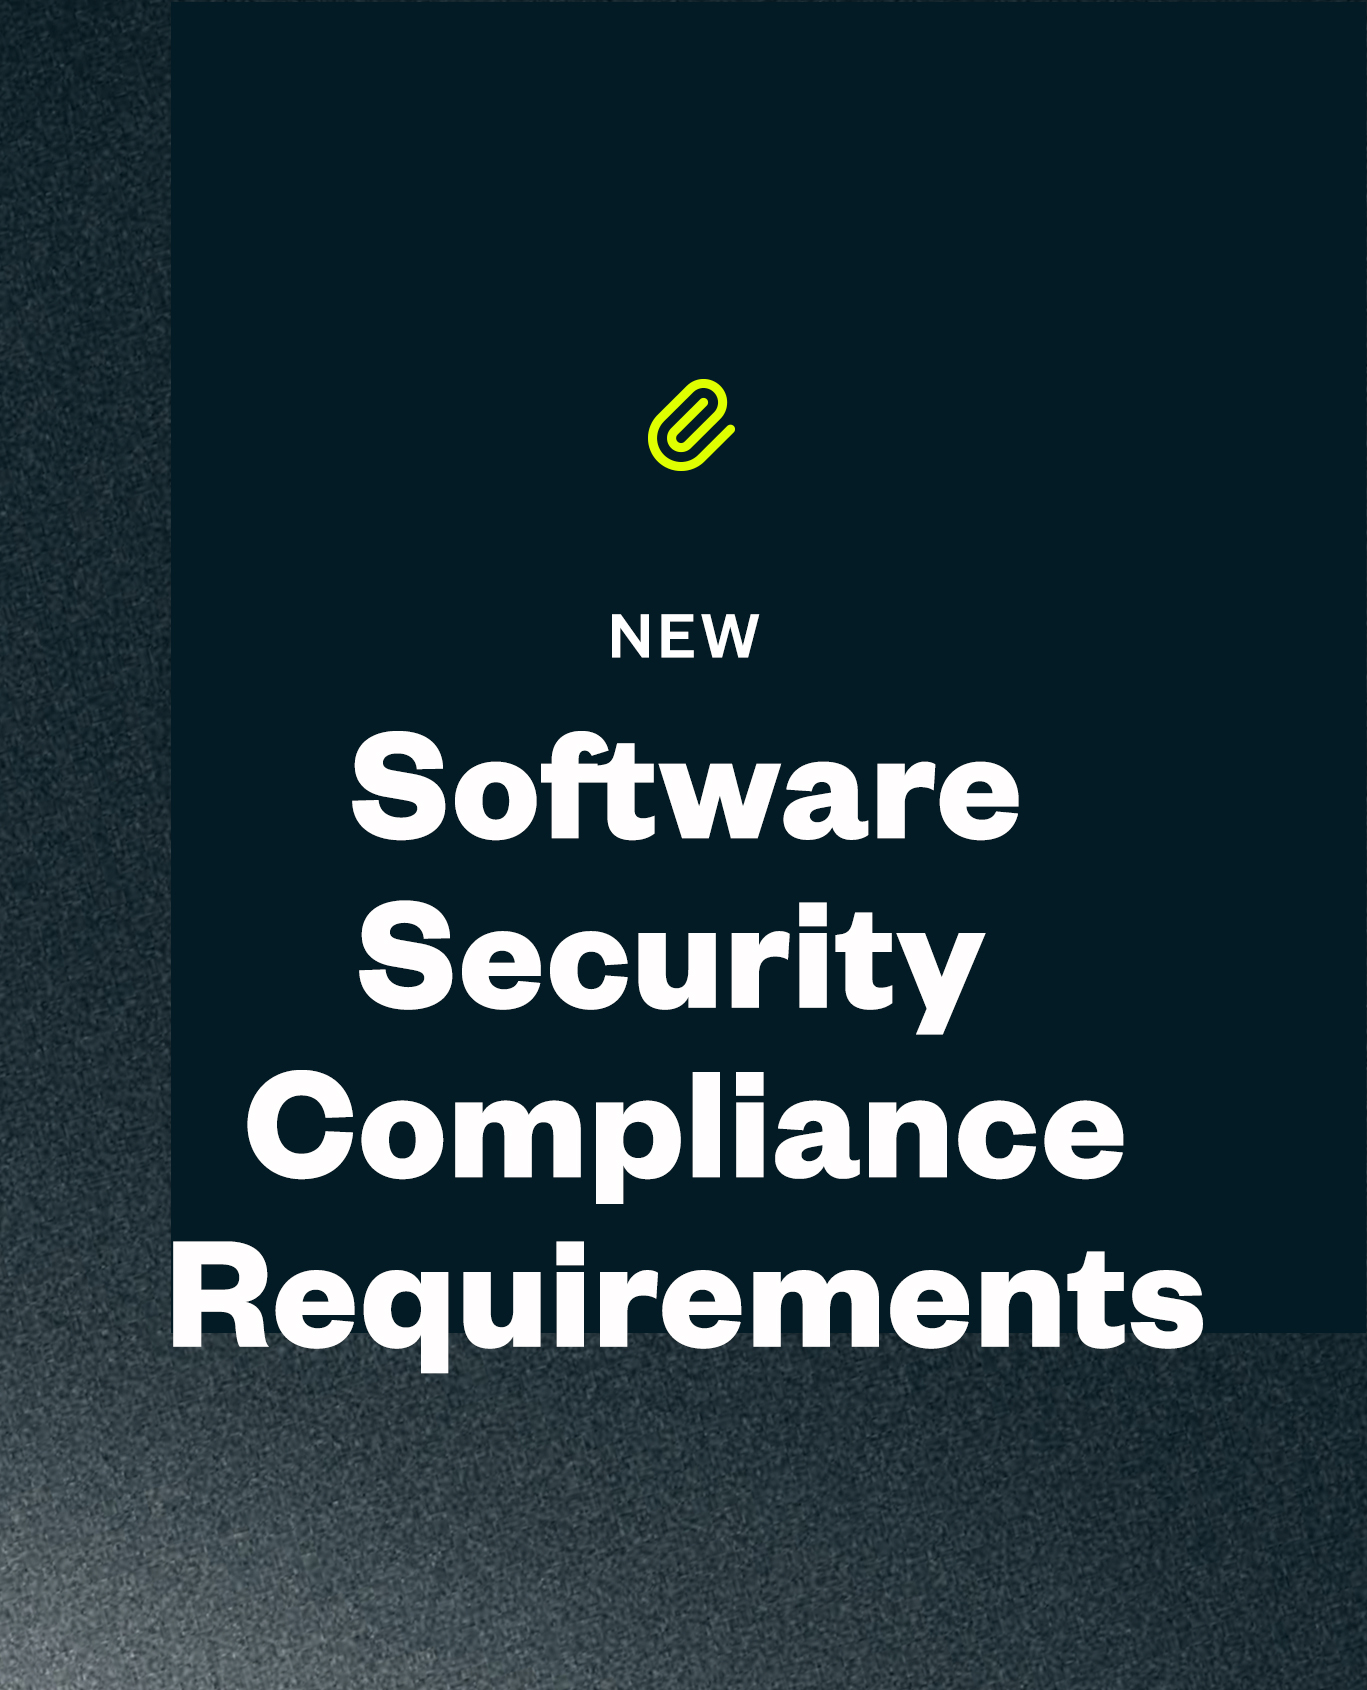 article SoftwareSecurityComplianceRequirements 1 0